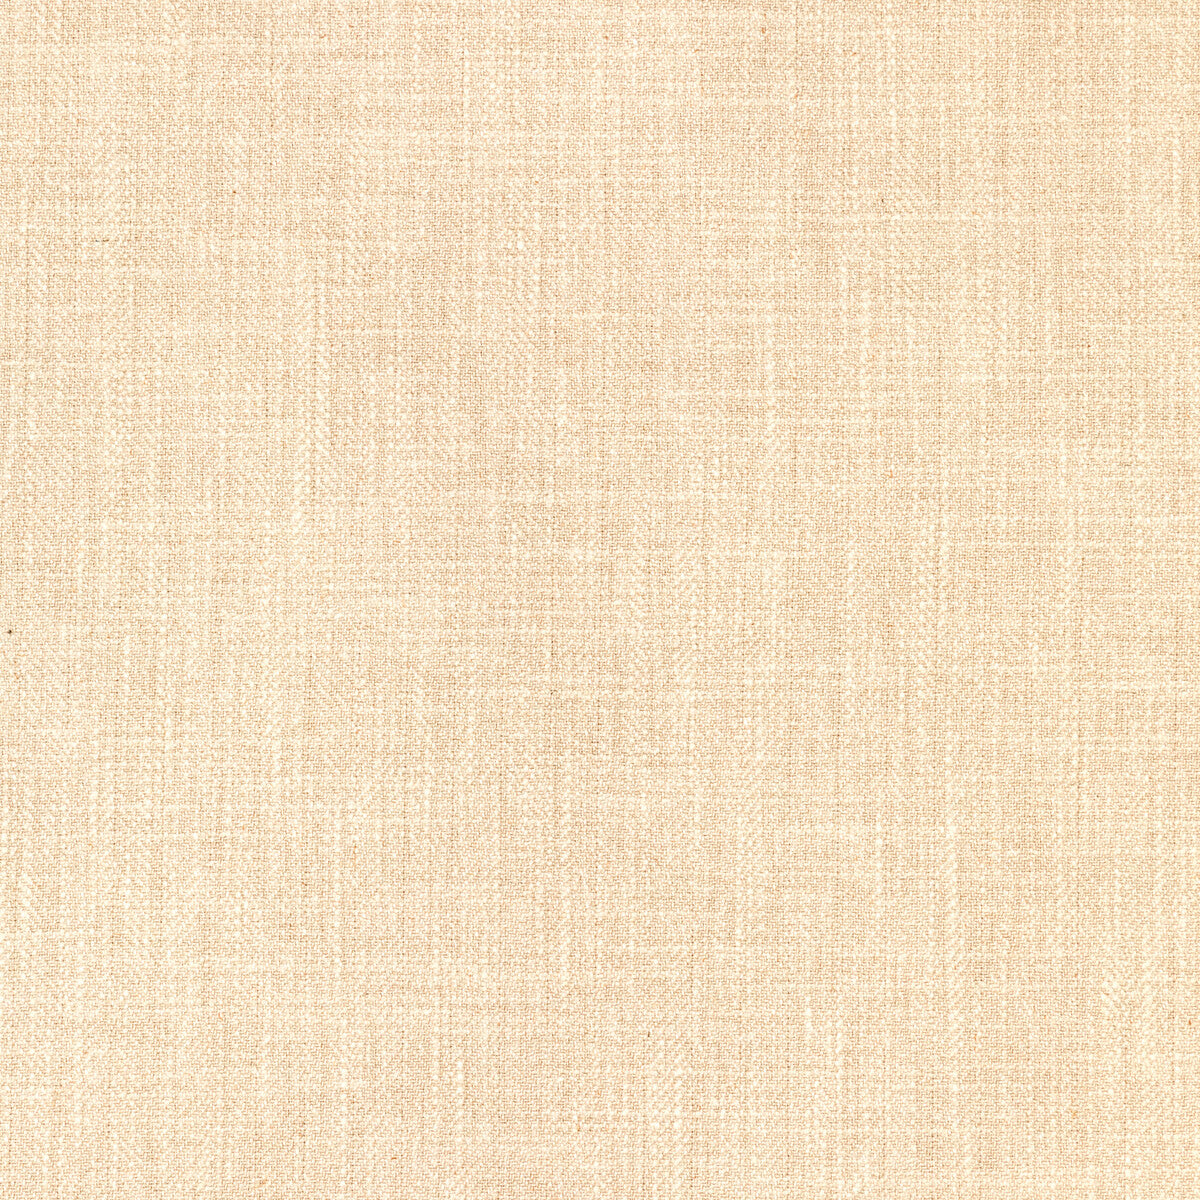 Kravet Basics fabric in 33842-161 color - pattern 33842.161.0 - by Kravet Basics in the Perfect Plains collection